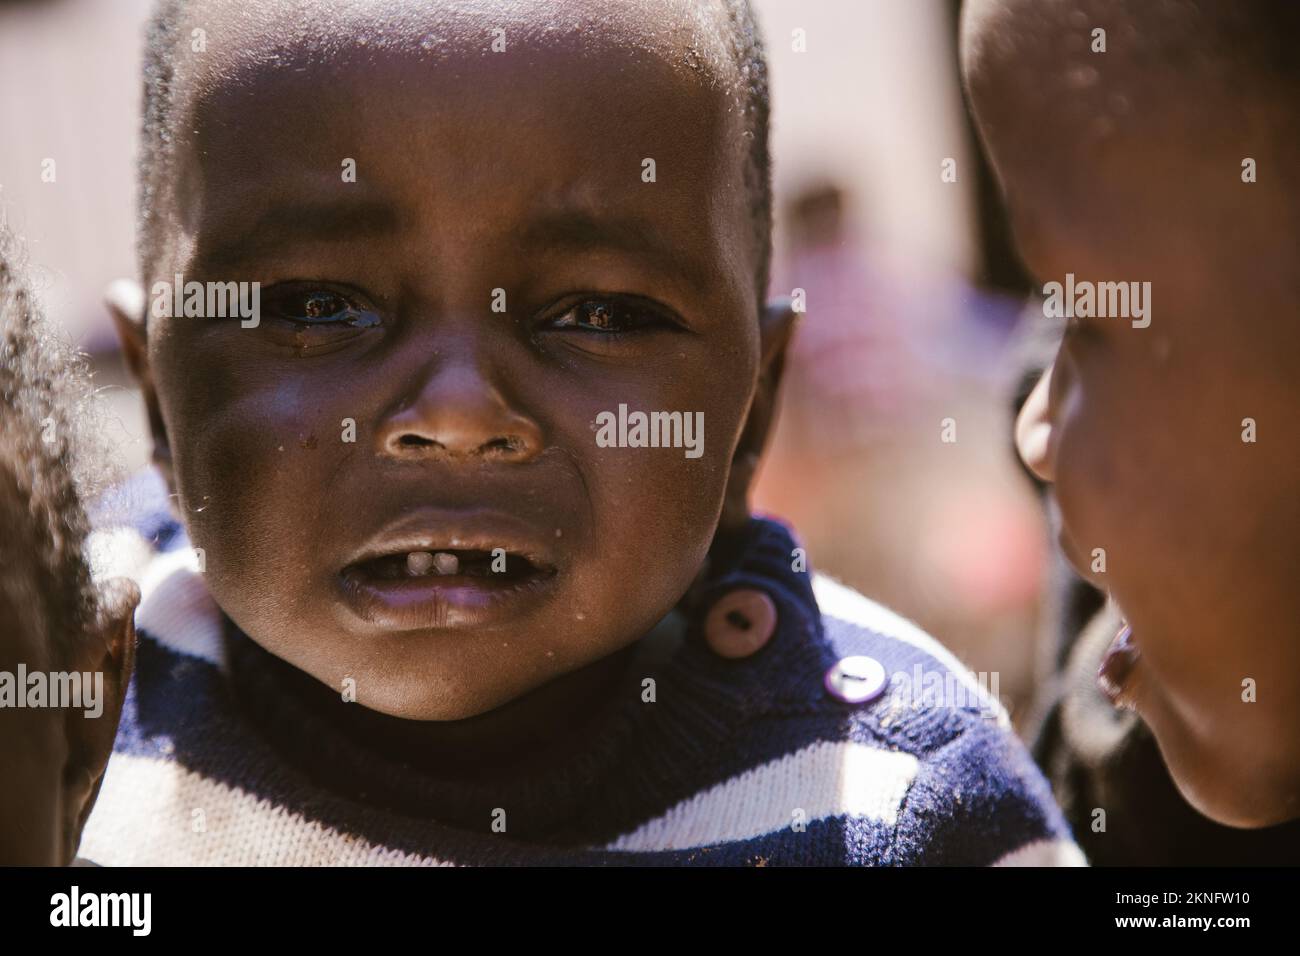 Mount Elgon, Kenya - 01.25.2017: Portrait of an African American child. A missionary team came to help homeless children. Stock Photo